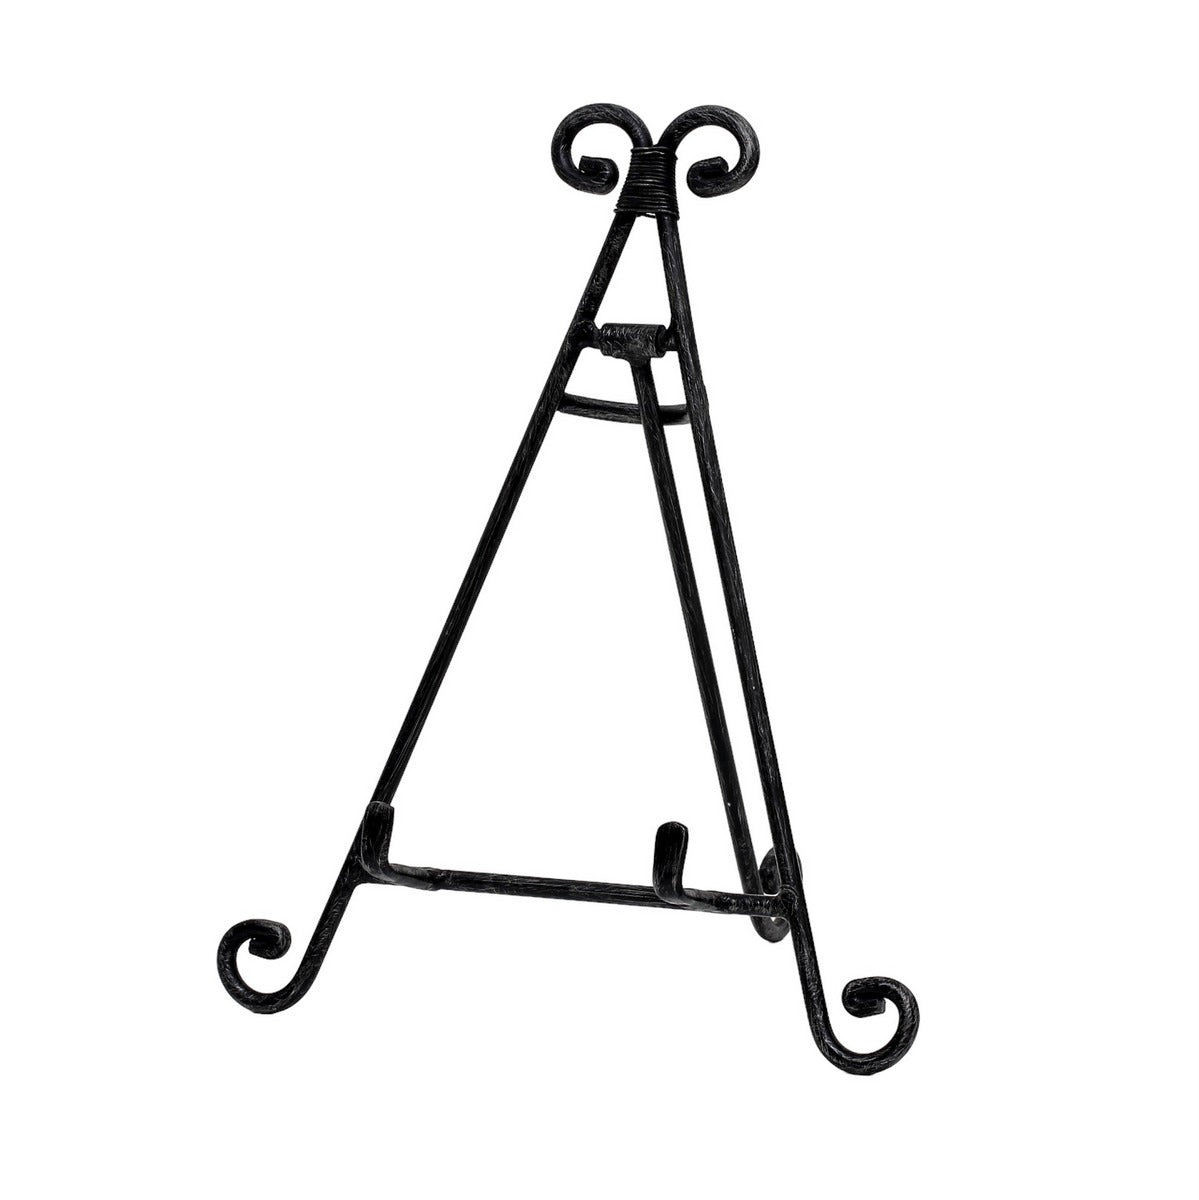 METAL STAND: Wrought Iron Plate Stand BLACK (Max plate size 14" Diam.) - Artistica.com